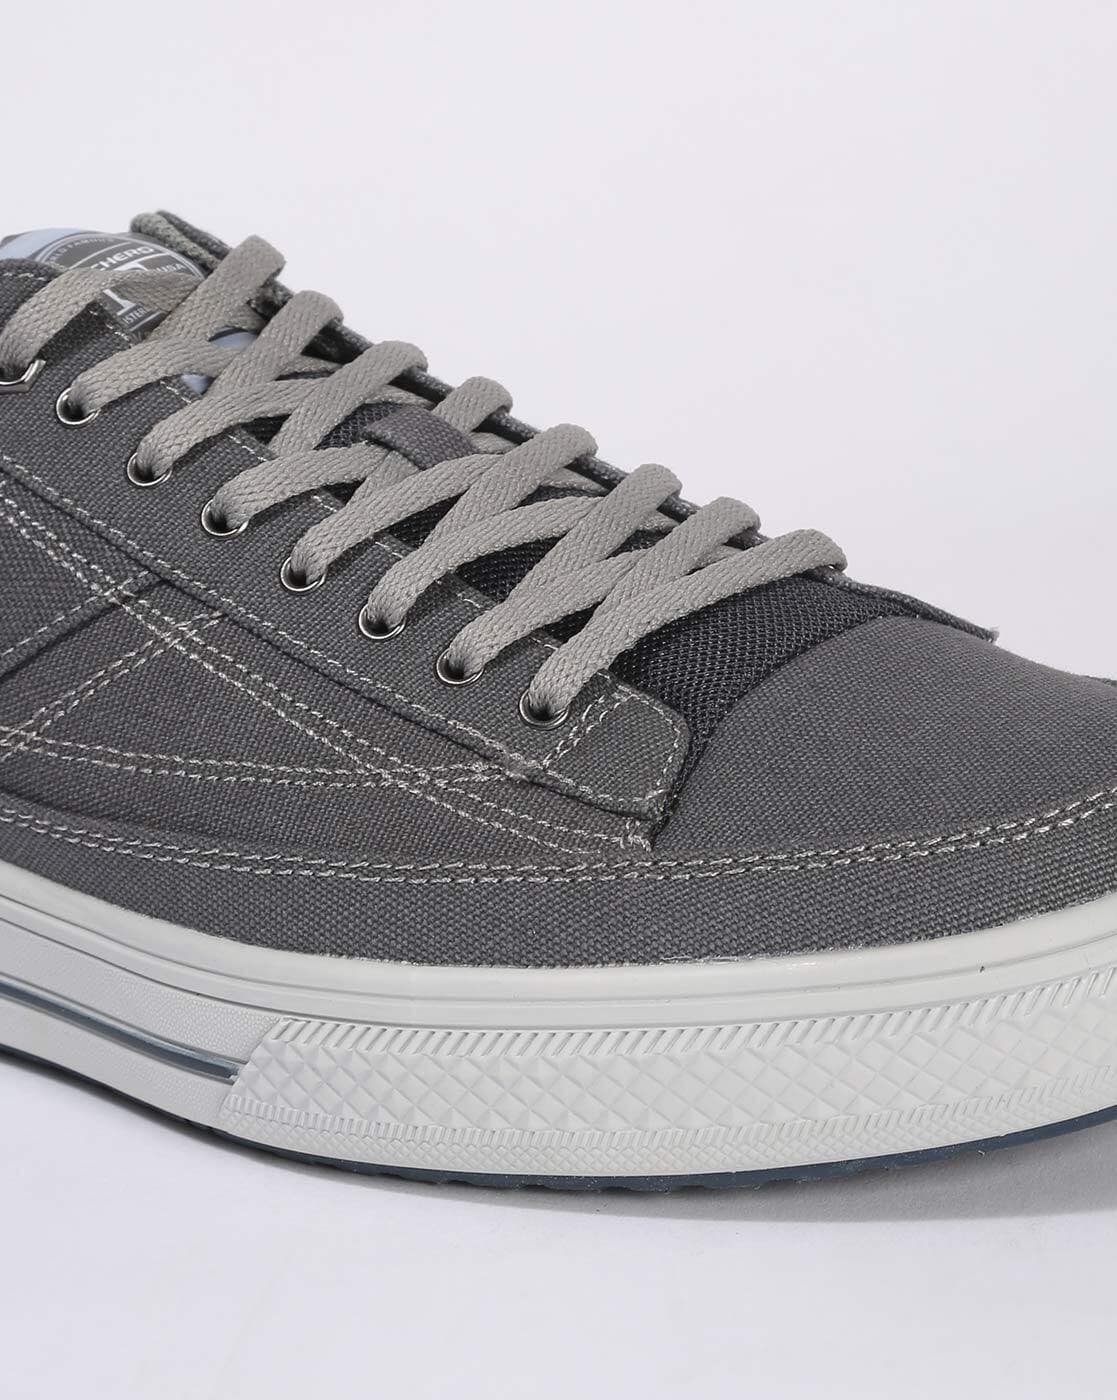 Buy Charcoal Grey Casual Shoes for by Skechers Ajio.com